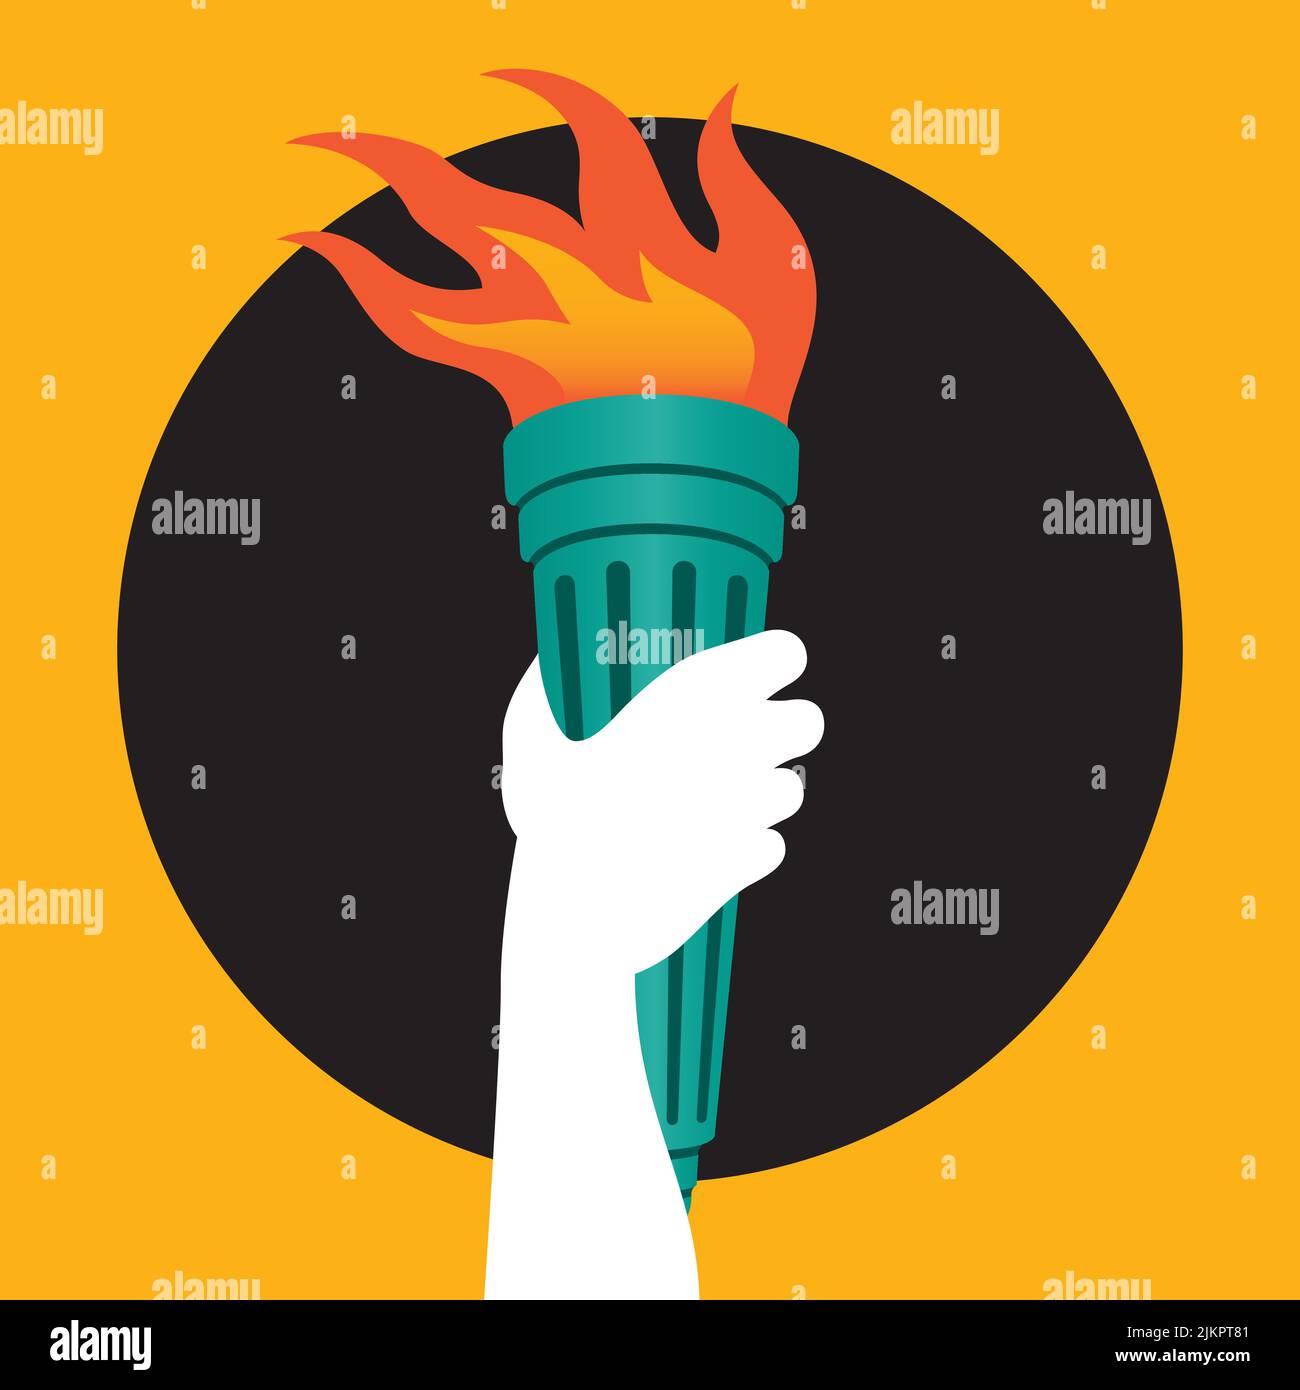 Badge or icon of arm holding burning torch Vector illustration of a persons arm holding a flaming torch high to symbolize enlightenment, freedom and k Stock Vector